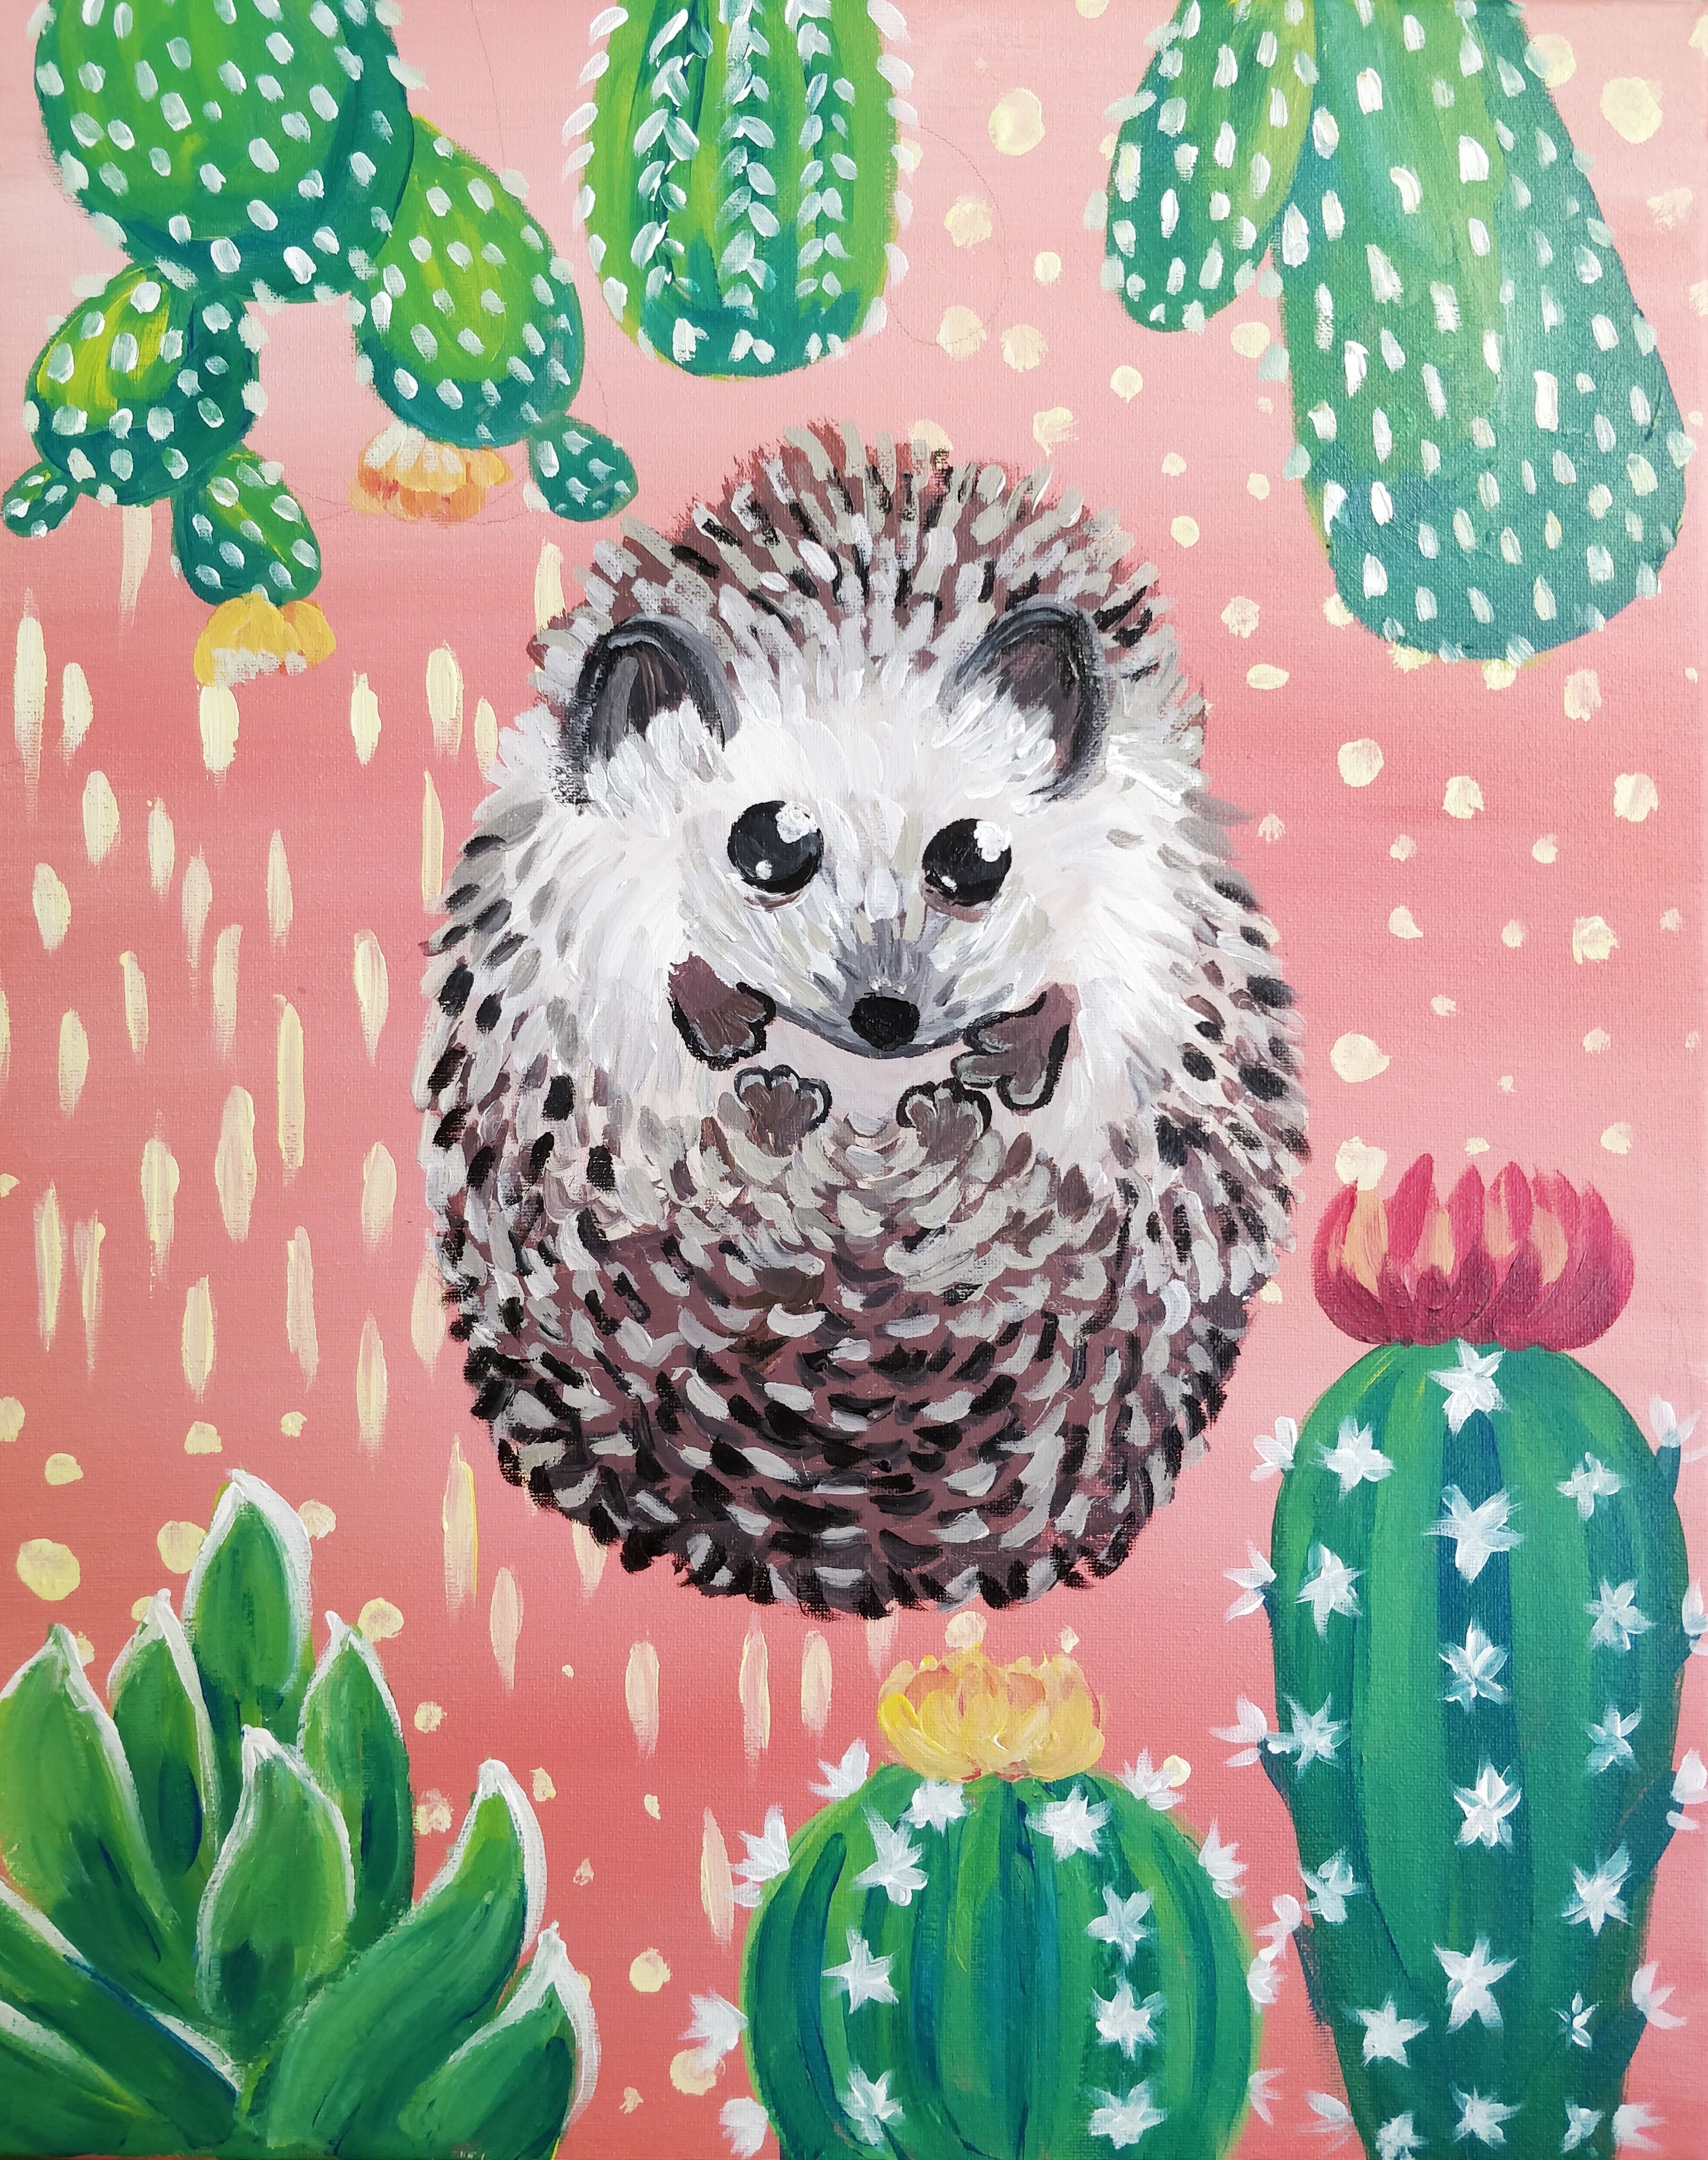 A Hedgehog Cactus Chaos experience project by Yaymaker